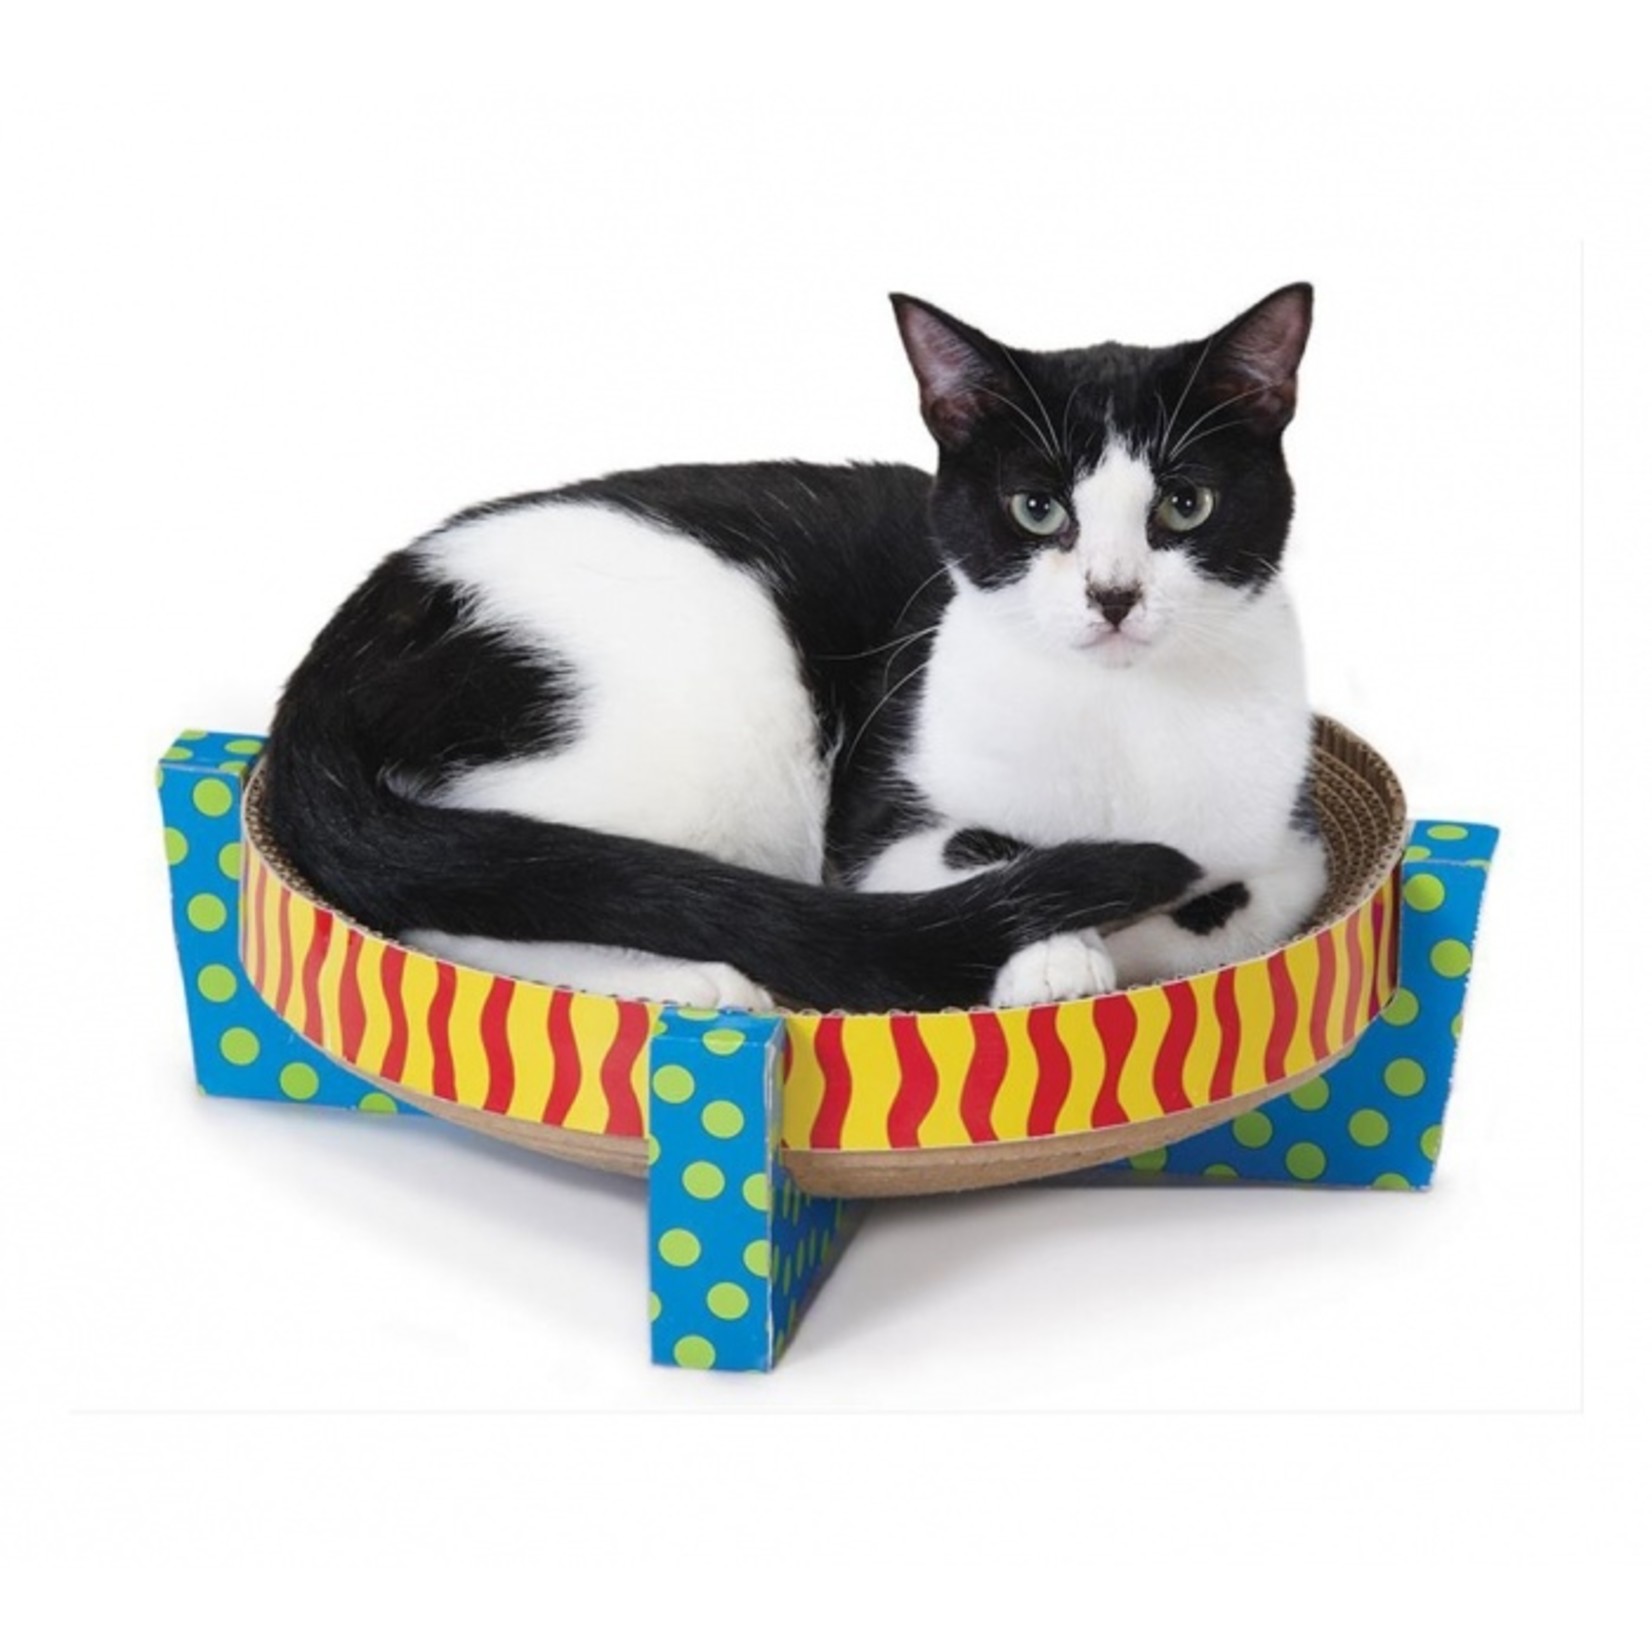 Petstages Petstages Easy Life Scratch, Snuggle, & Rest Cat Scratcher and Bed